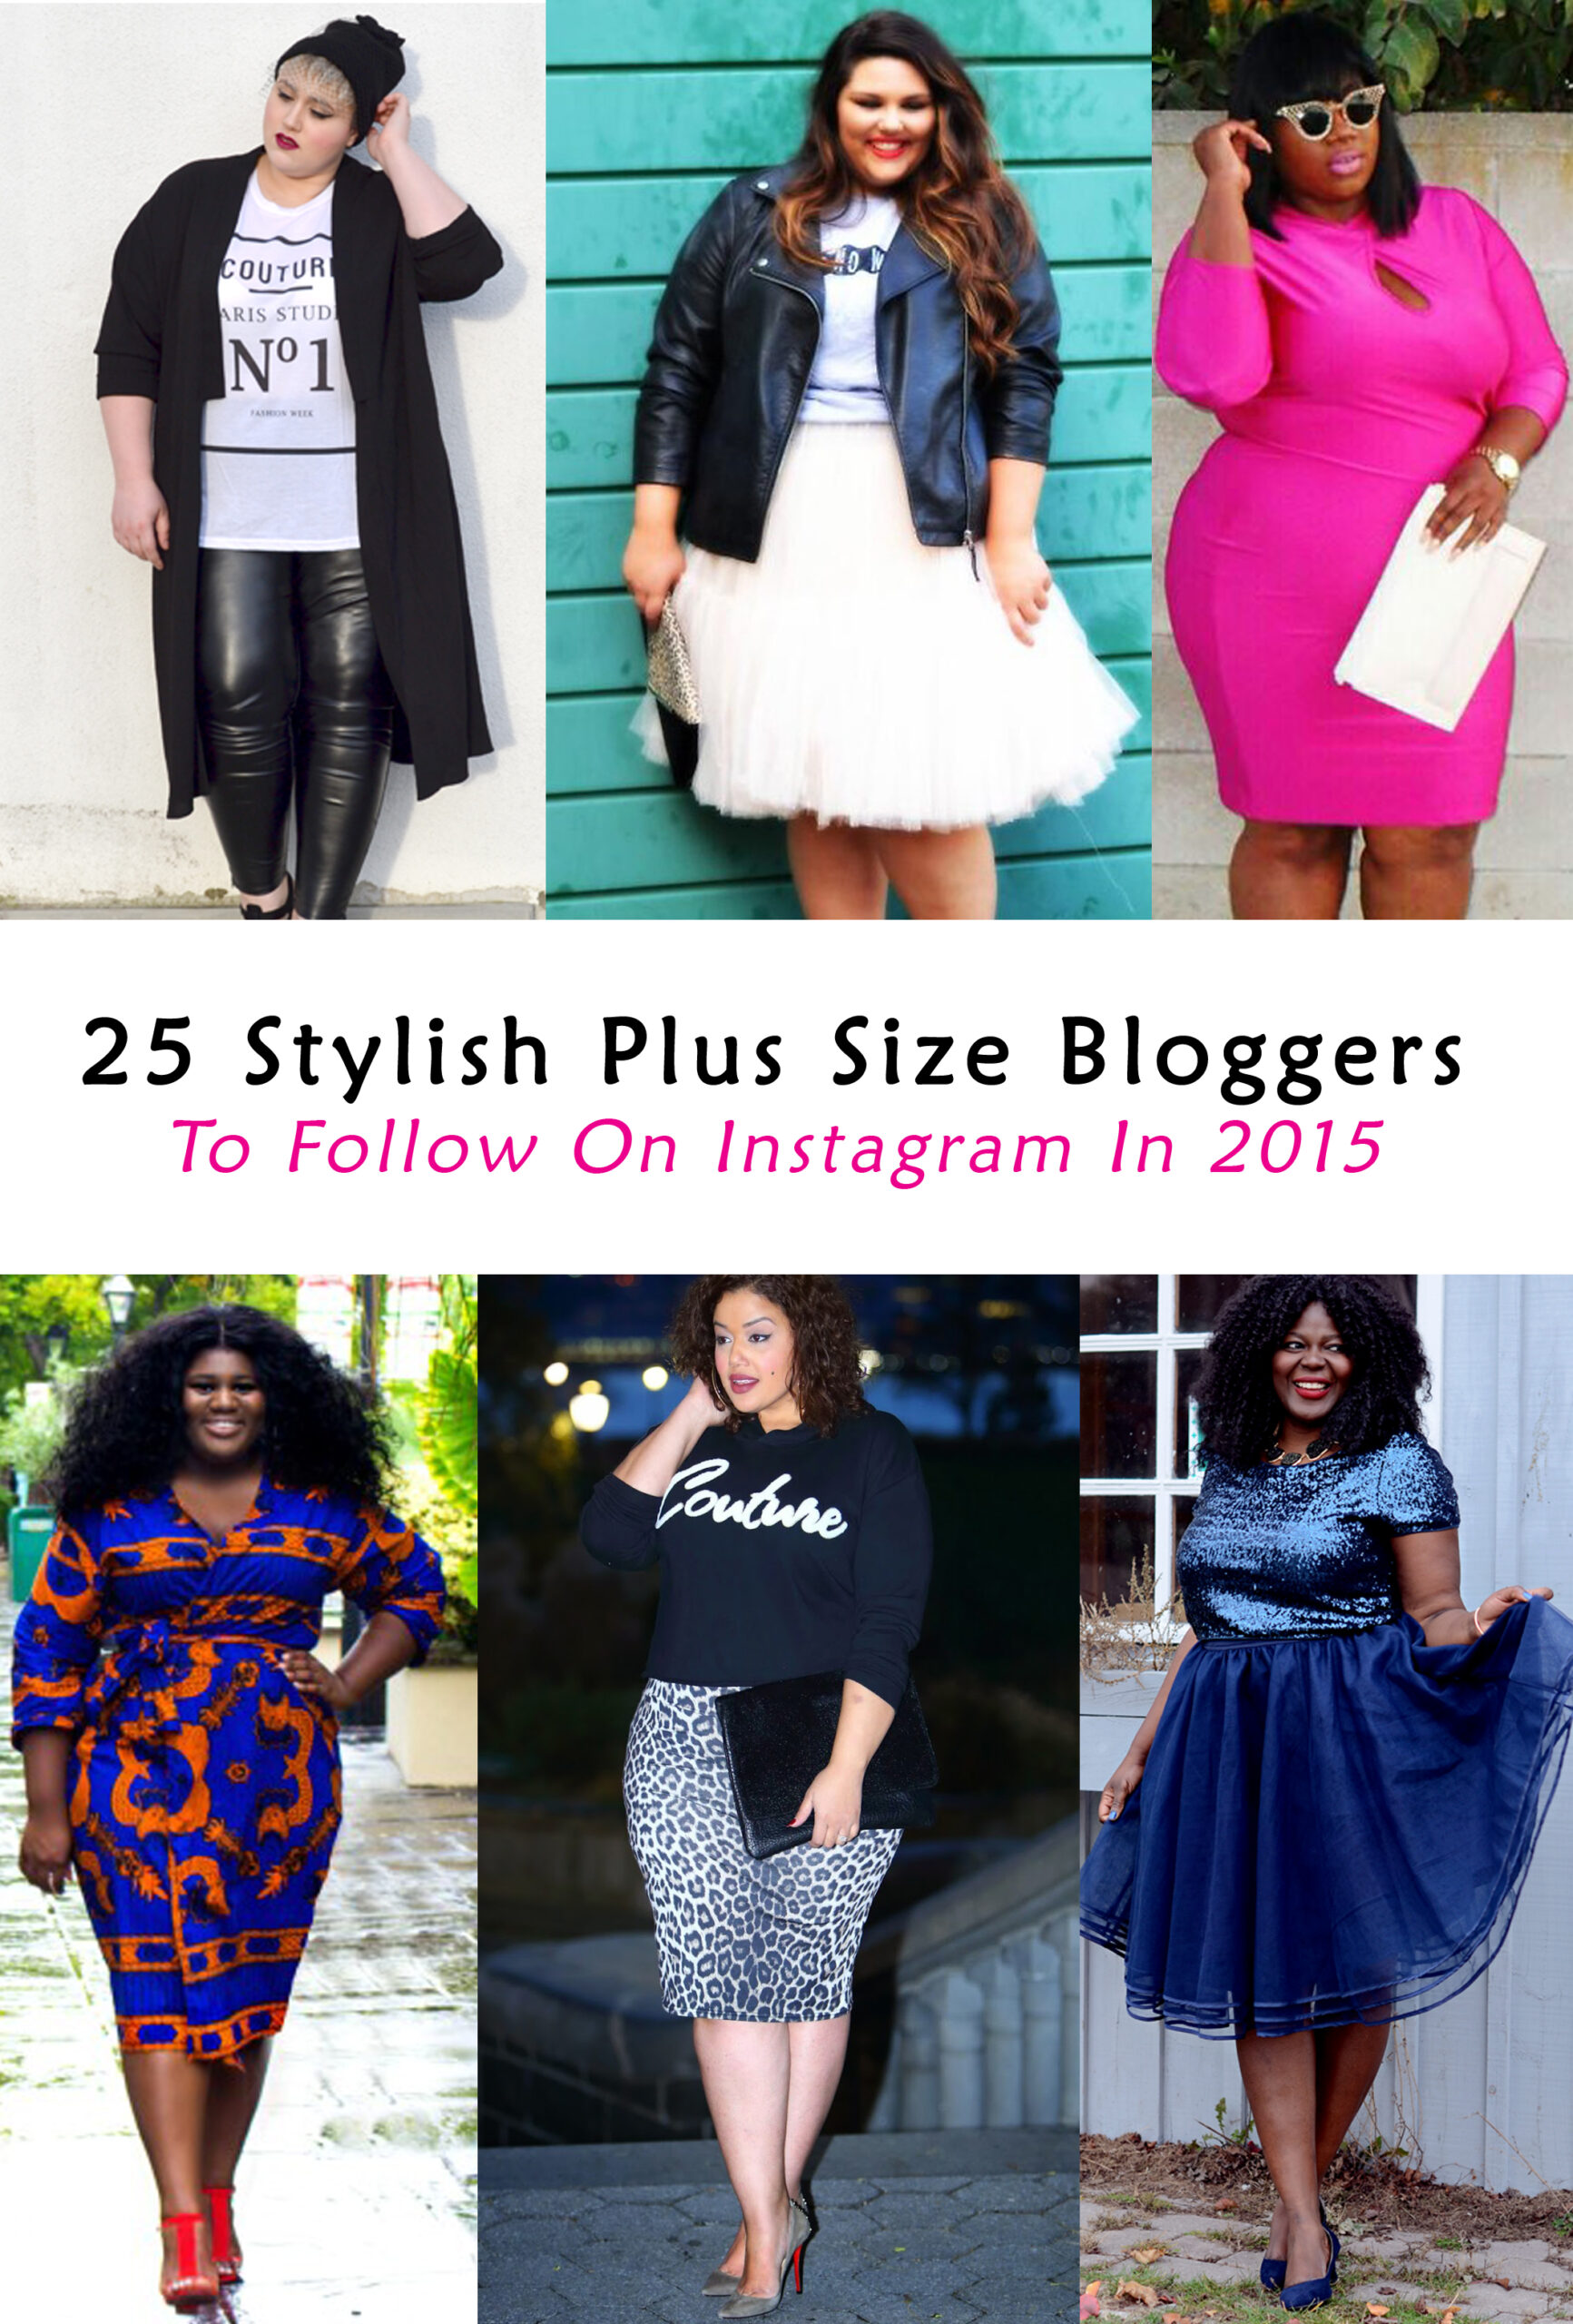 25 Plus Size Bloggers To Follow On Instagram In 2015 - Stylish Curves